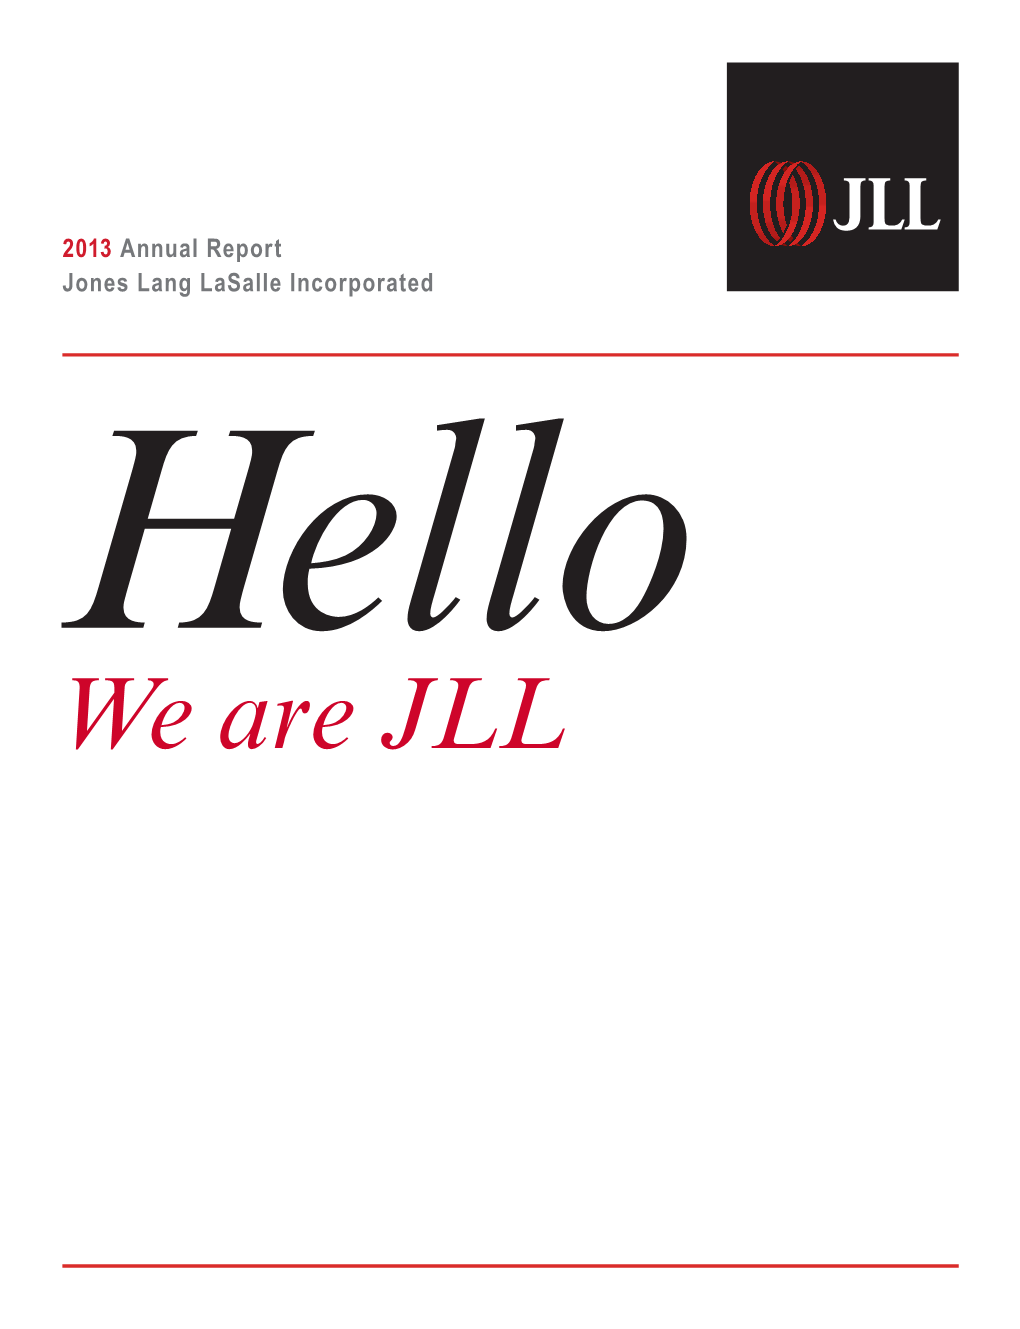 We Are JLL Who We Are JLL Is a Professional Services and Investment Management Firm Specializing in Real Estate